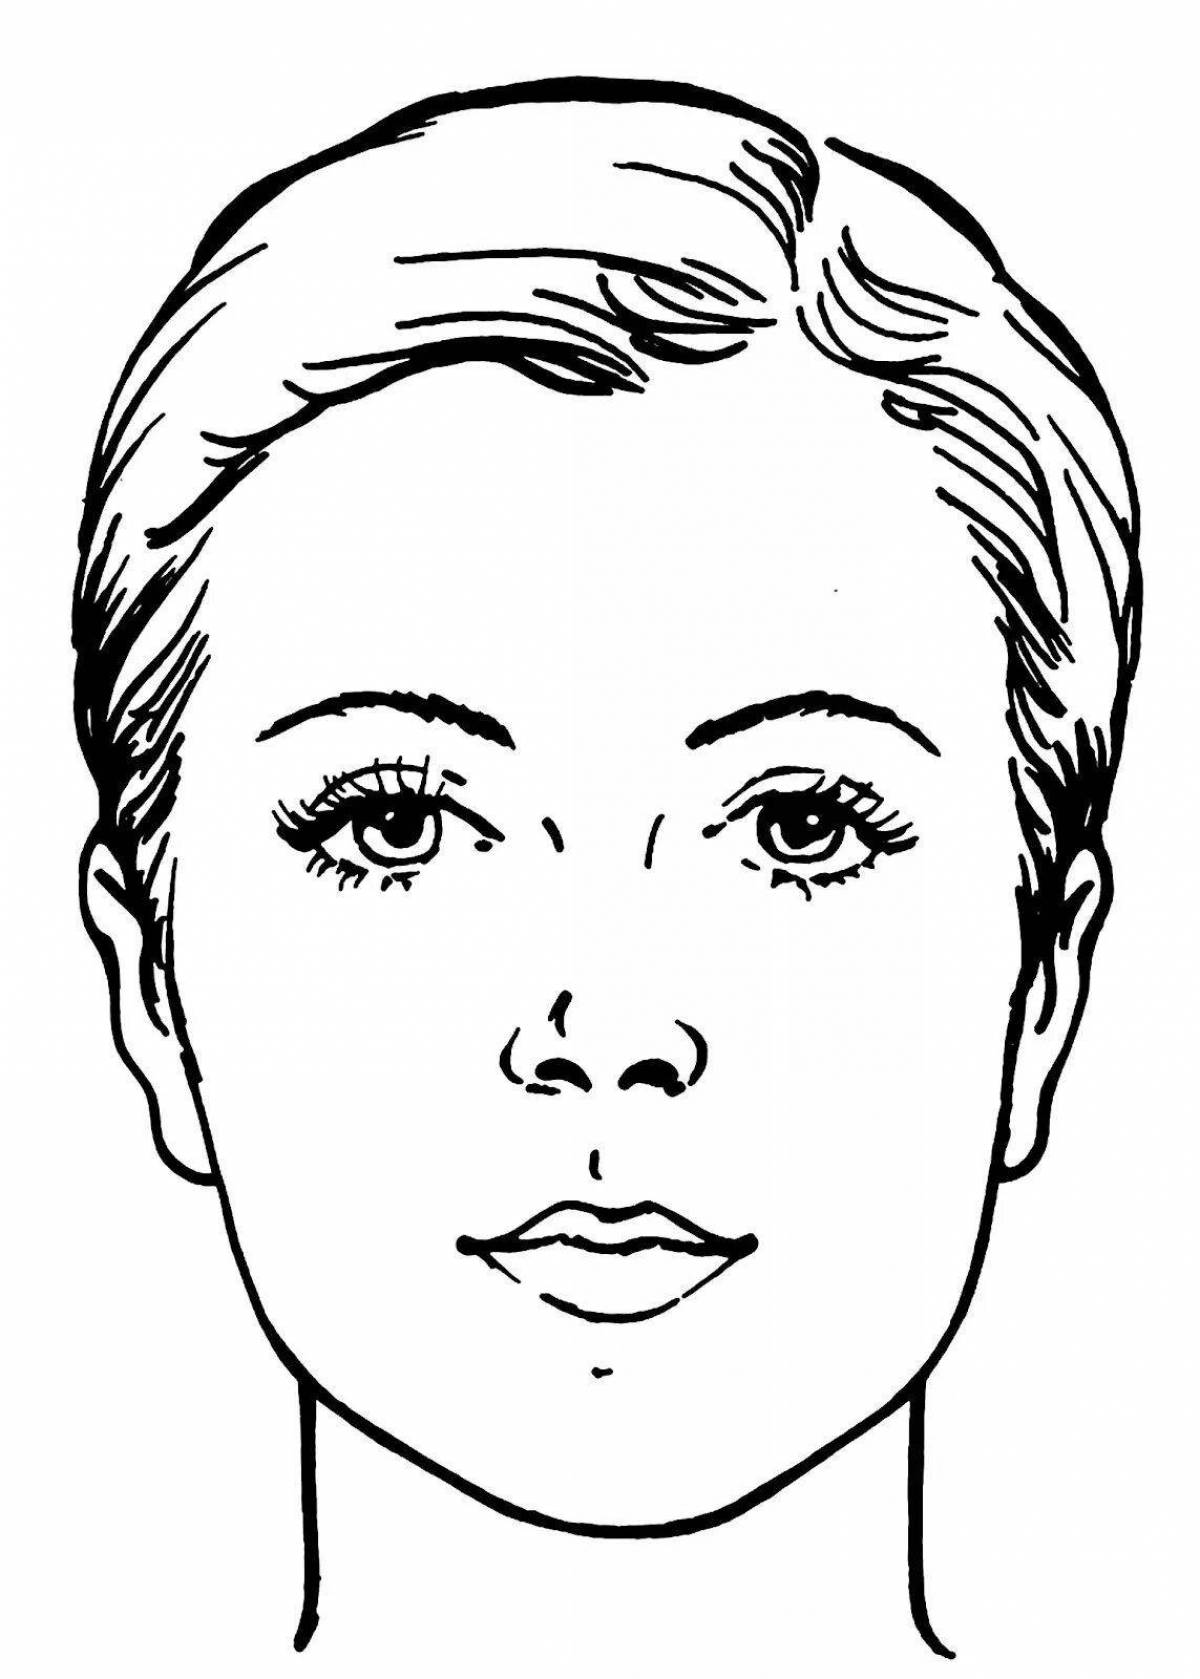 Live drawing of a face